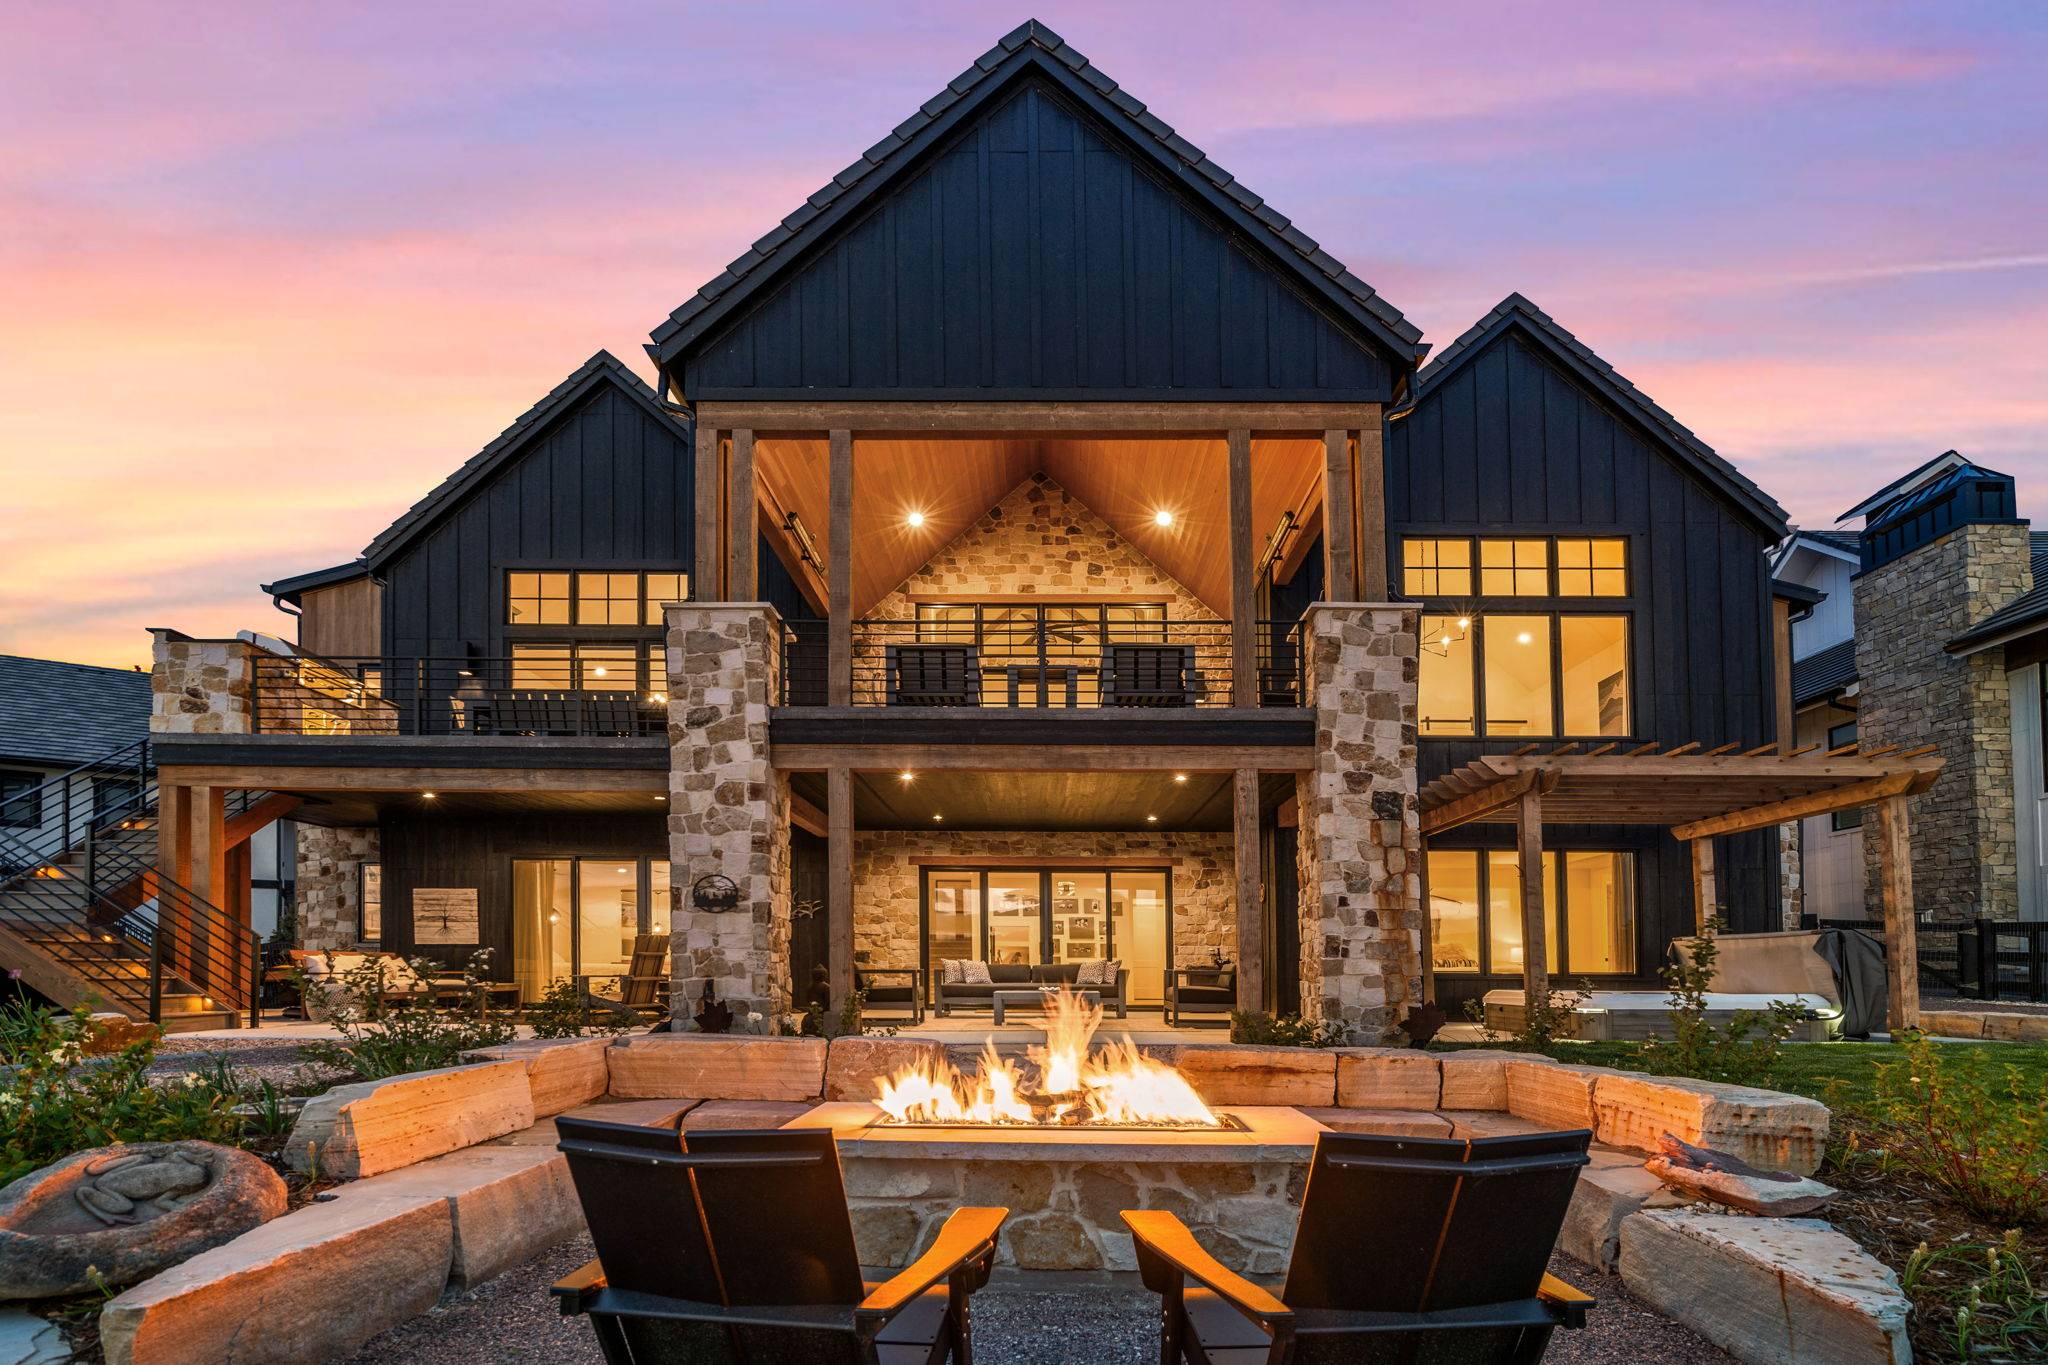 TPC Colorado PGA-TOUR Managed Golf Course Community - Luxury Home Hits Market @ $4M Listed With Kyle Coy